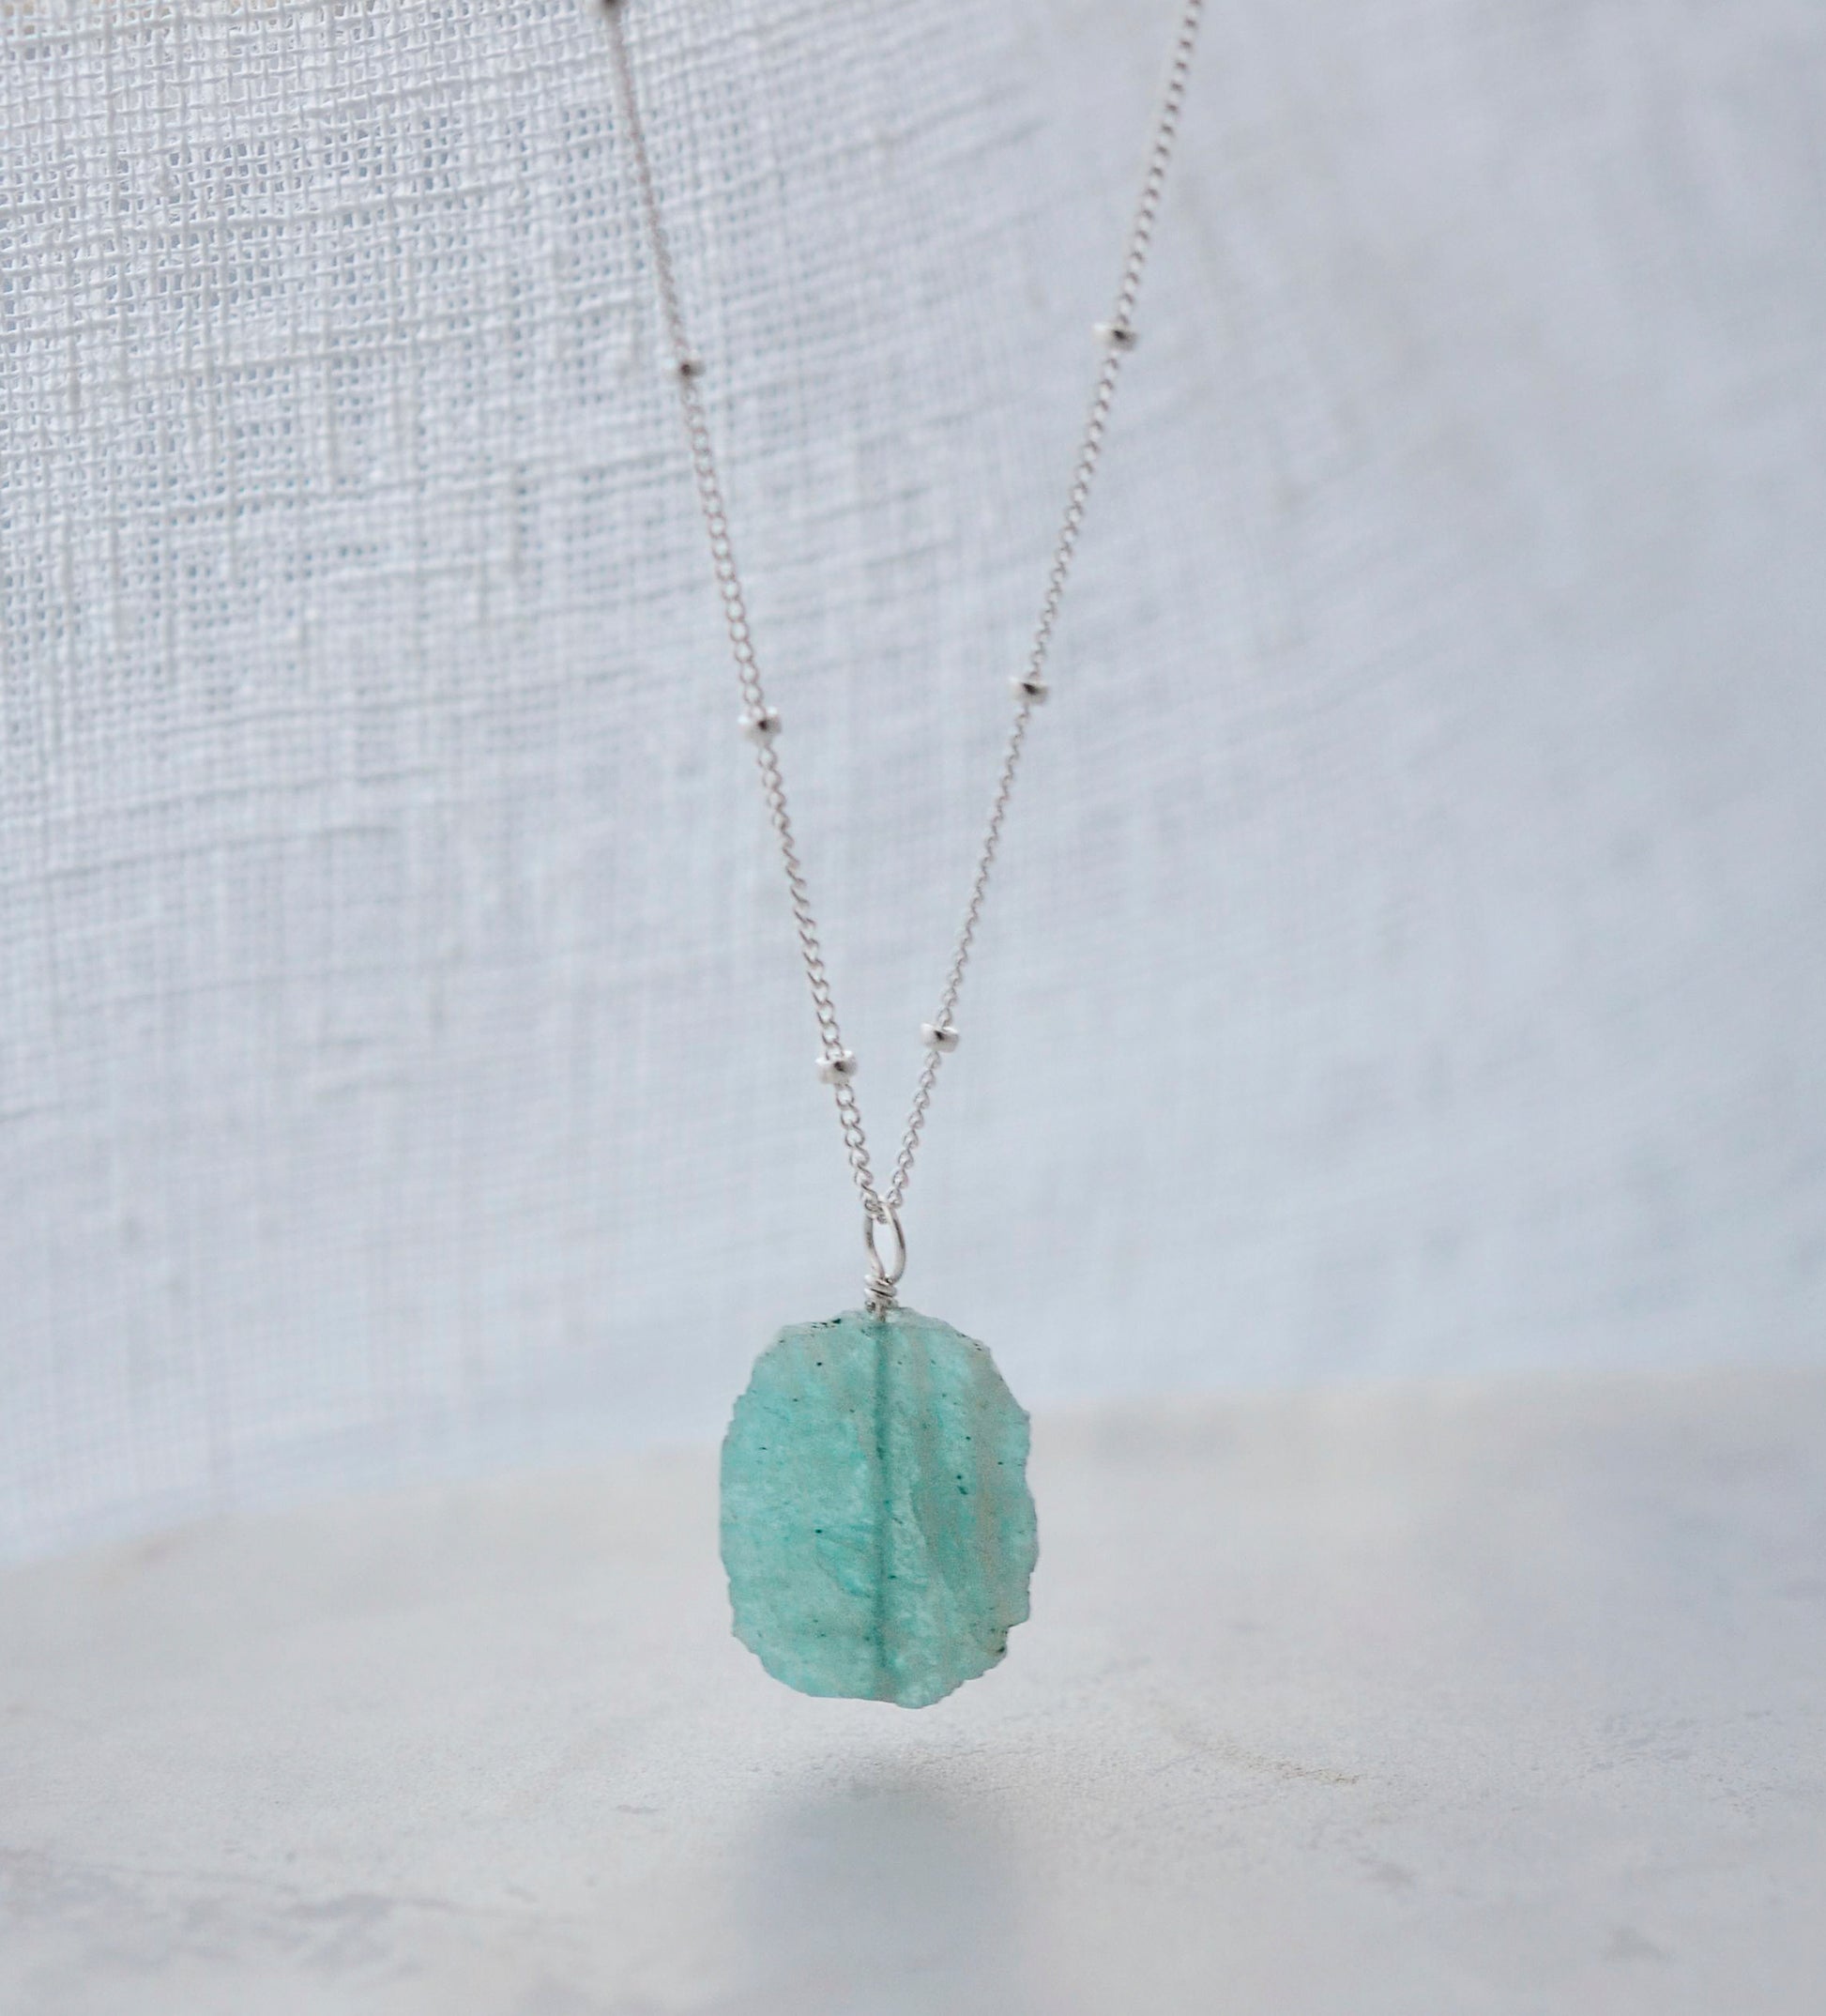 Bright aqua blue Amazonite stone cut into a thin, polished slice with raw edges, then set onto a sterling silver beaded chain.